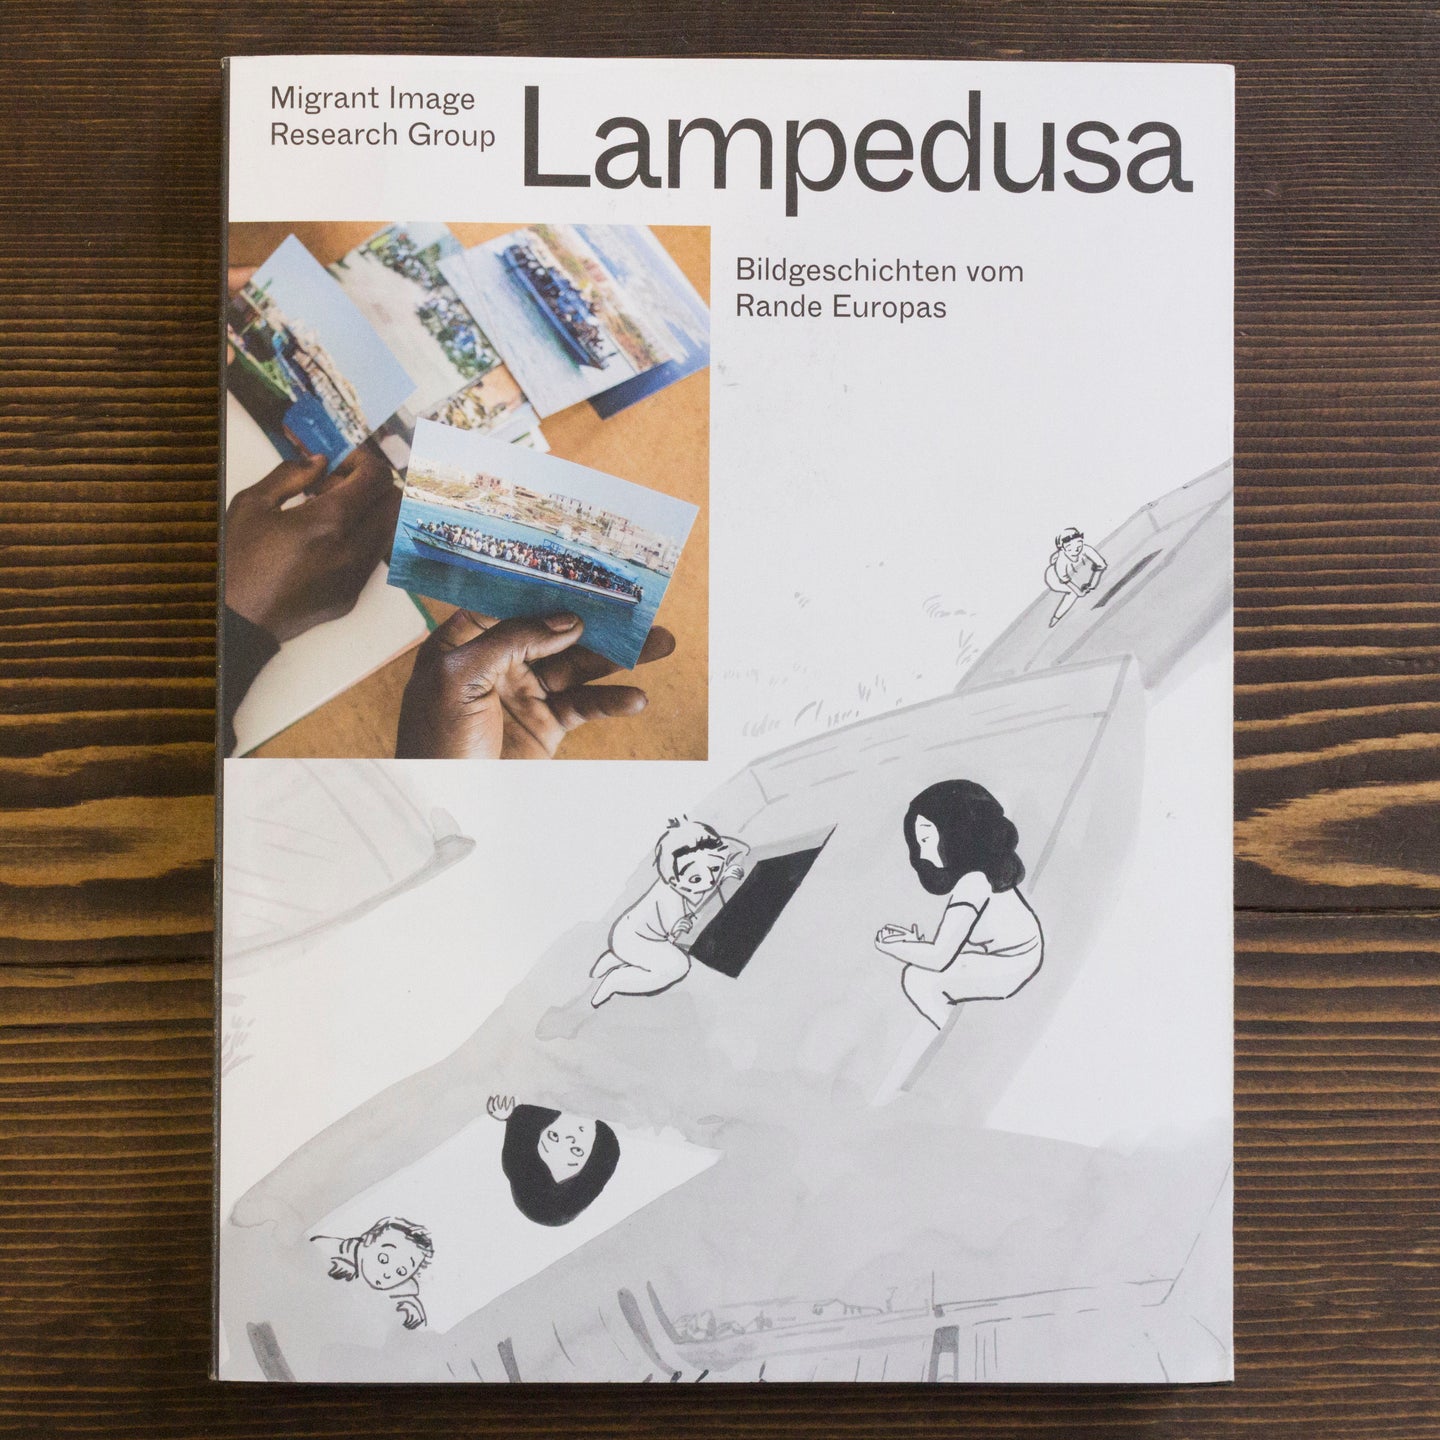 LAMPEDUSA. IMAGE STORIES FROM THE EGE OF EUROPE